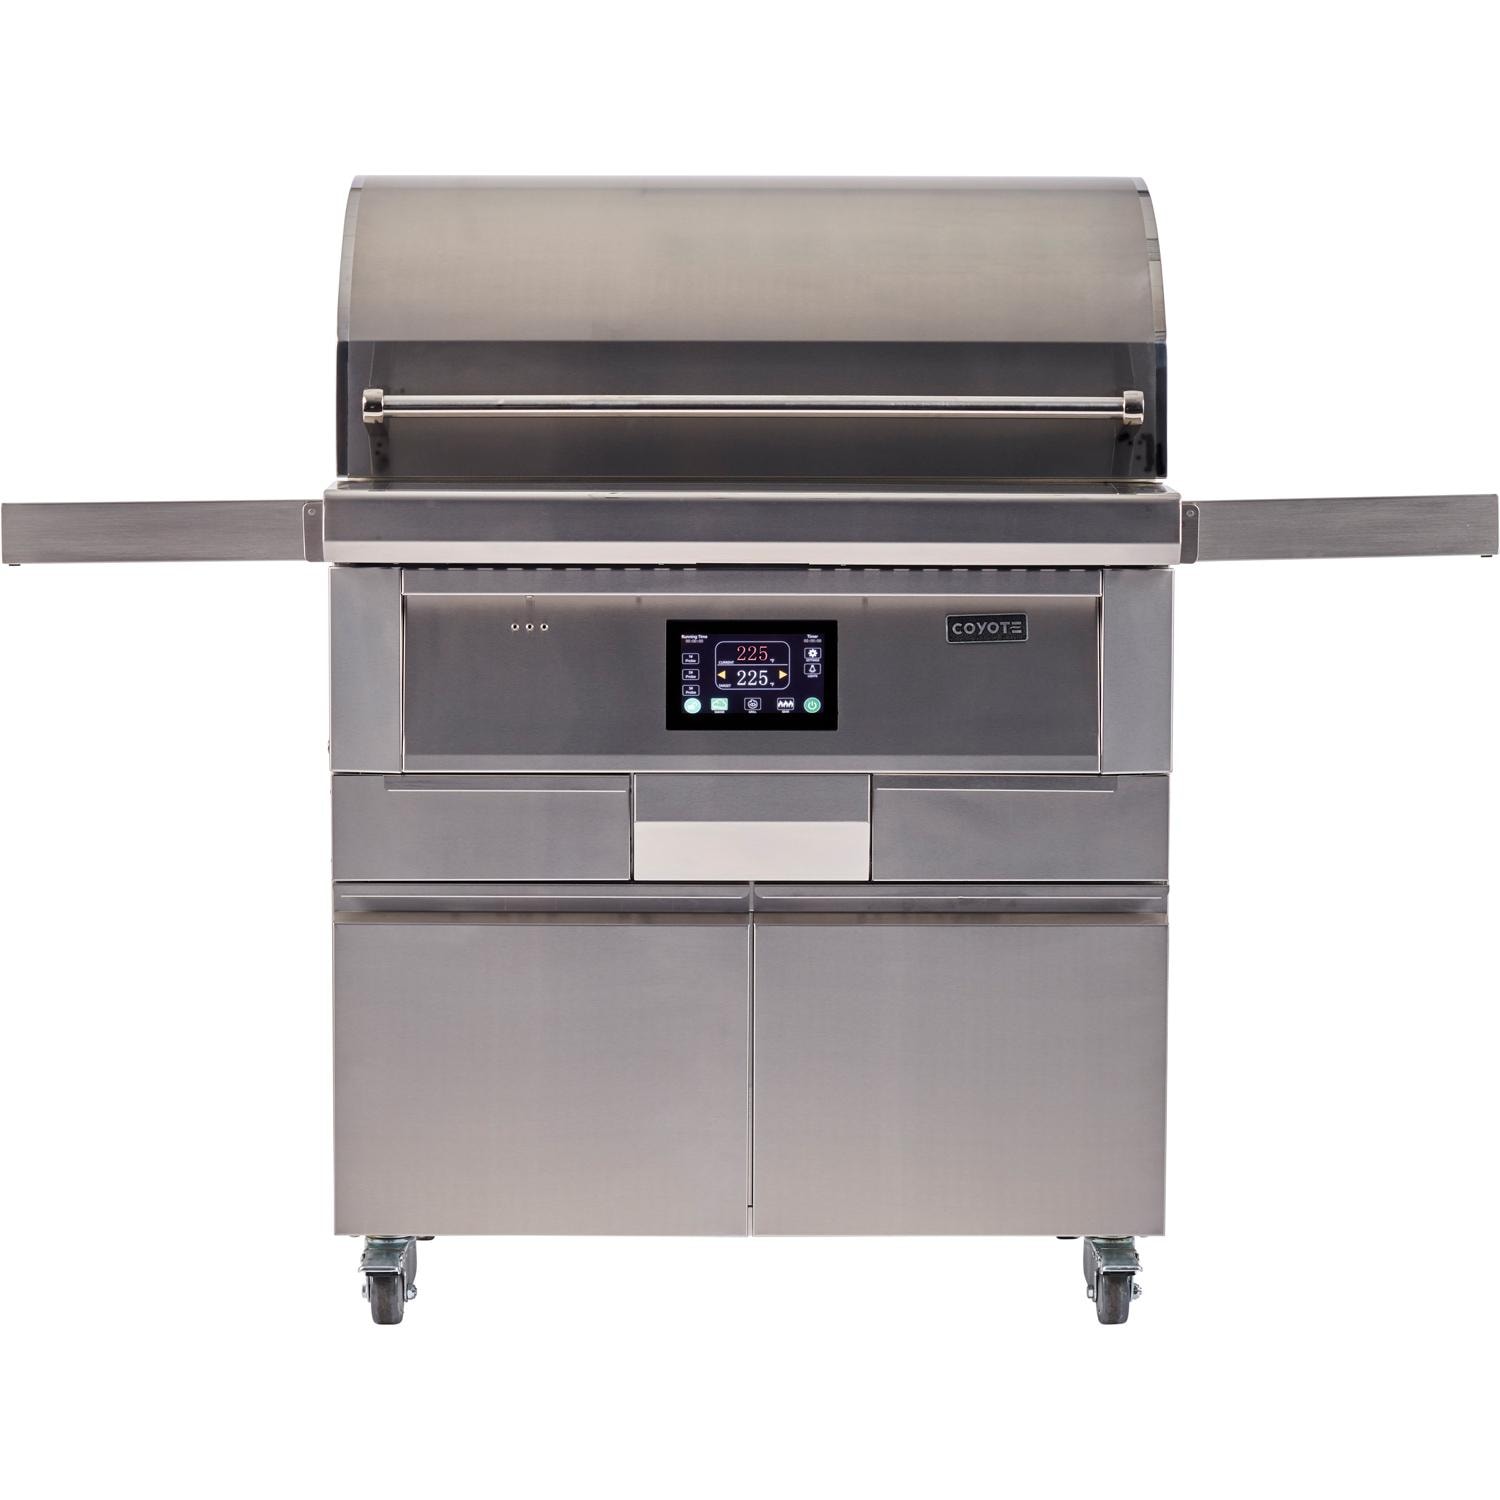 Coyote 36-Inch Pellet Grill - C1P36-FS - image 1 of 6